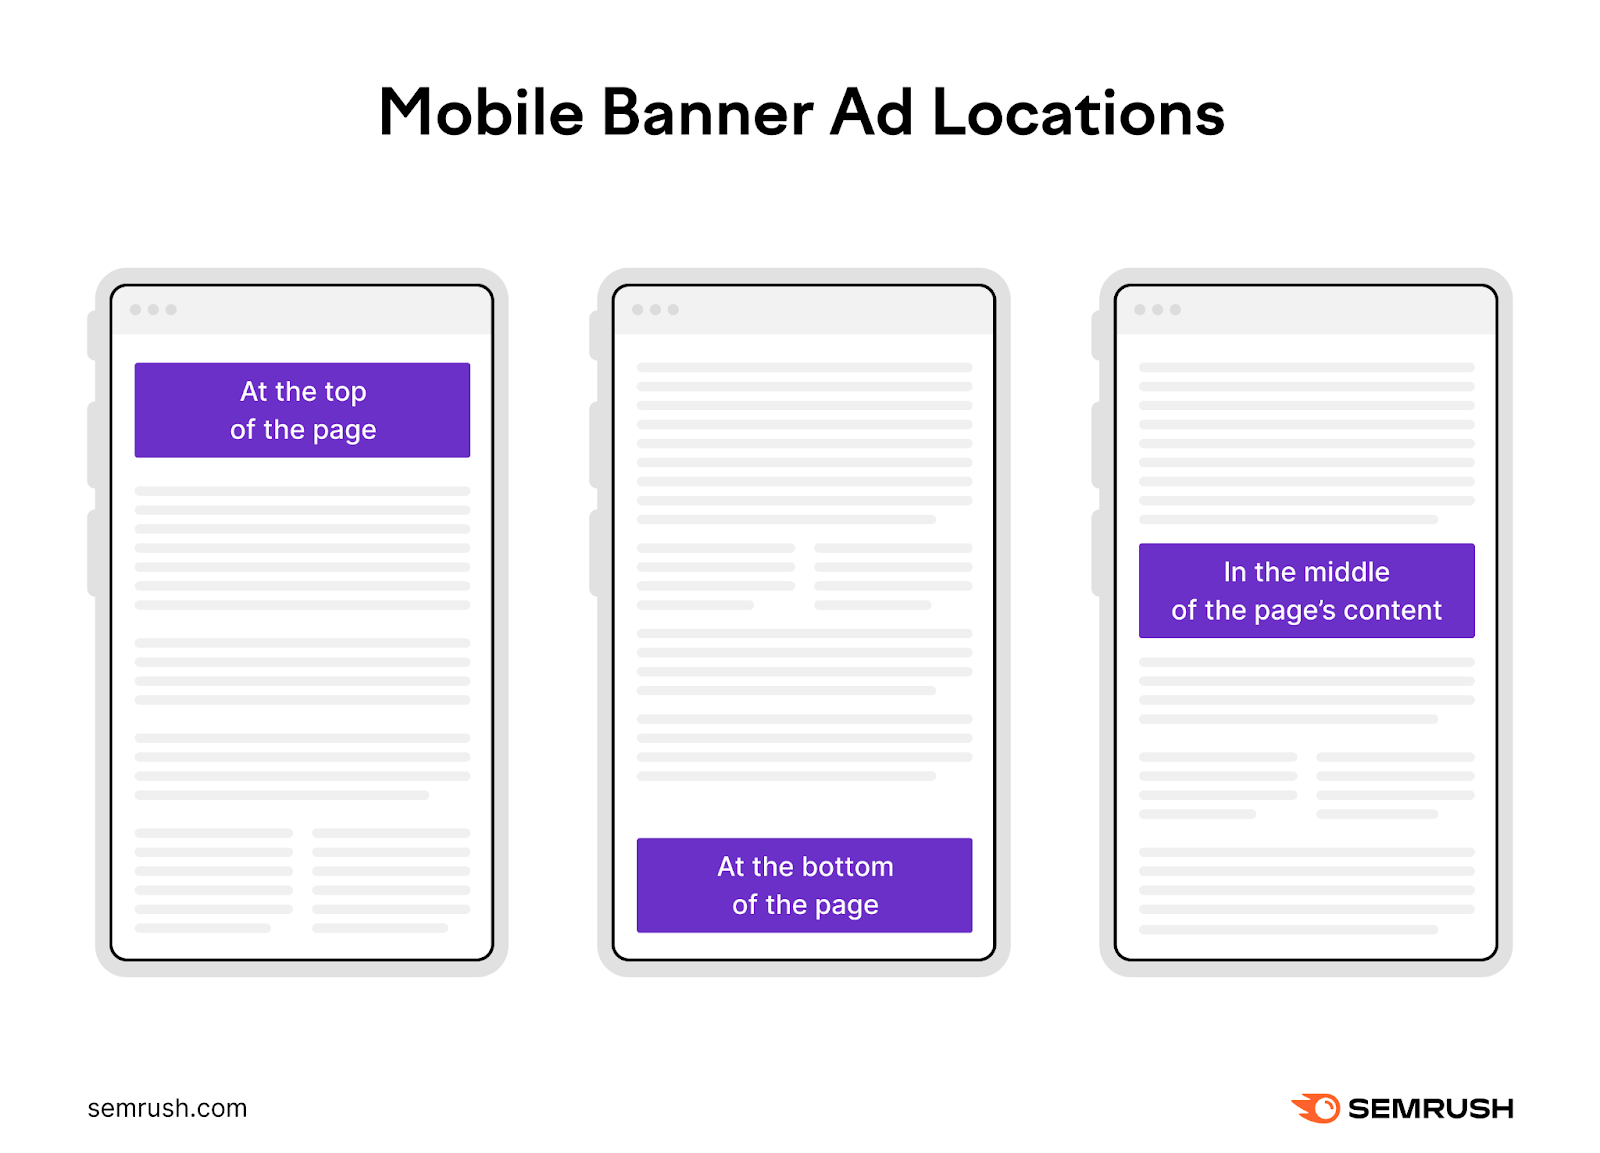 Mobile banner advertisement  locations